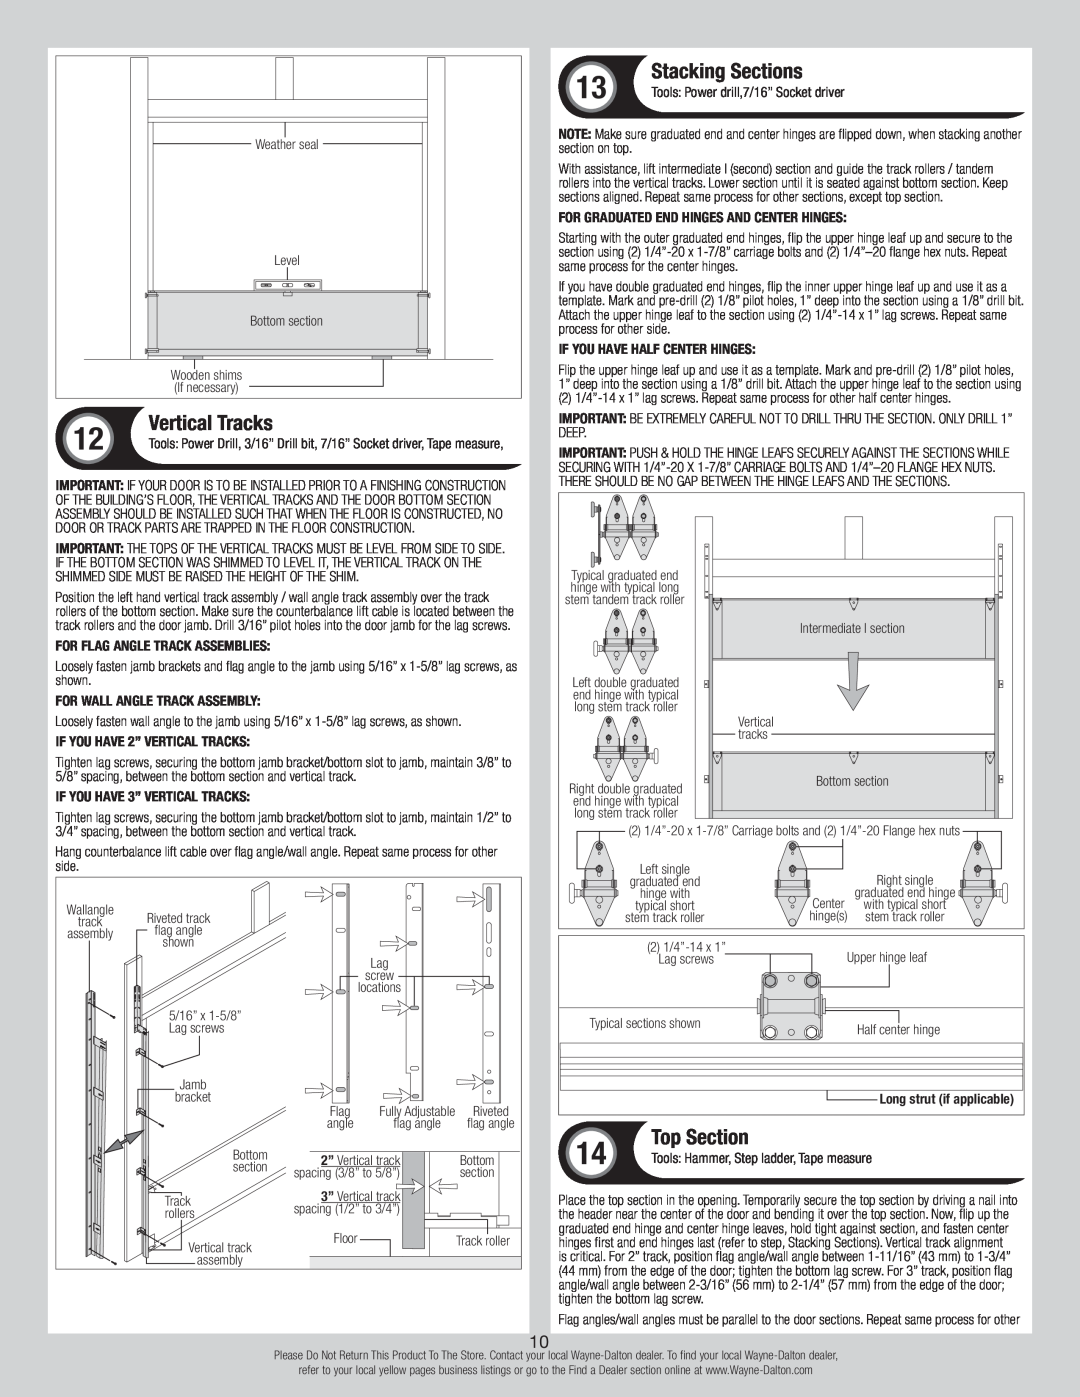 Wayne-Dalton 310/311, 105/110 installation instructions Vertical Tracks, Stacking Sections, Top Section 